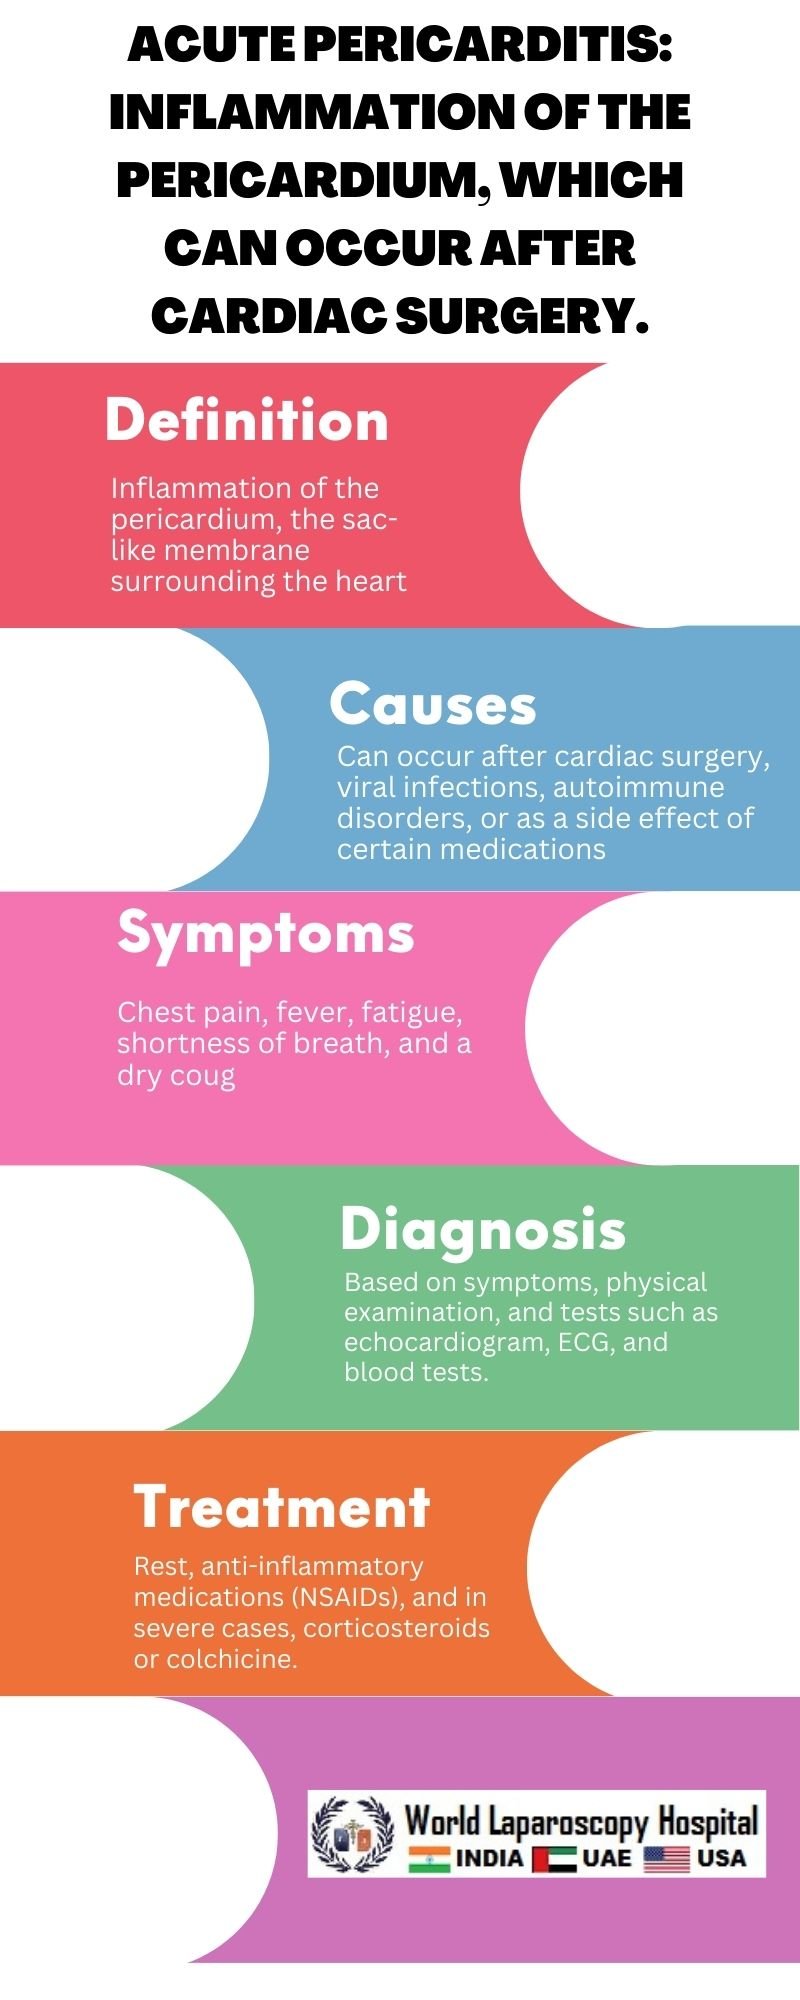 Acute pericarditis: Inflammation of the pericardium, which can occur after cardiac surgery.